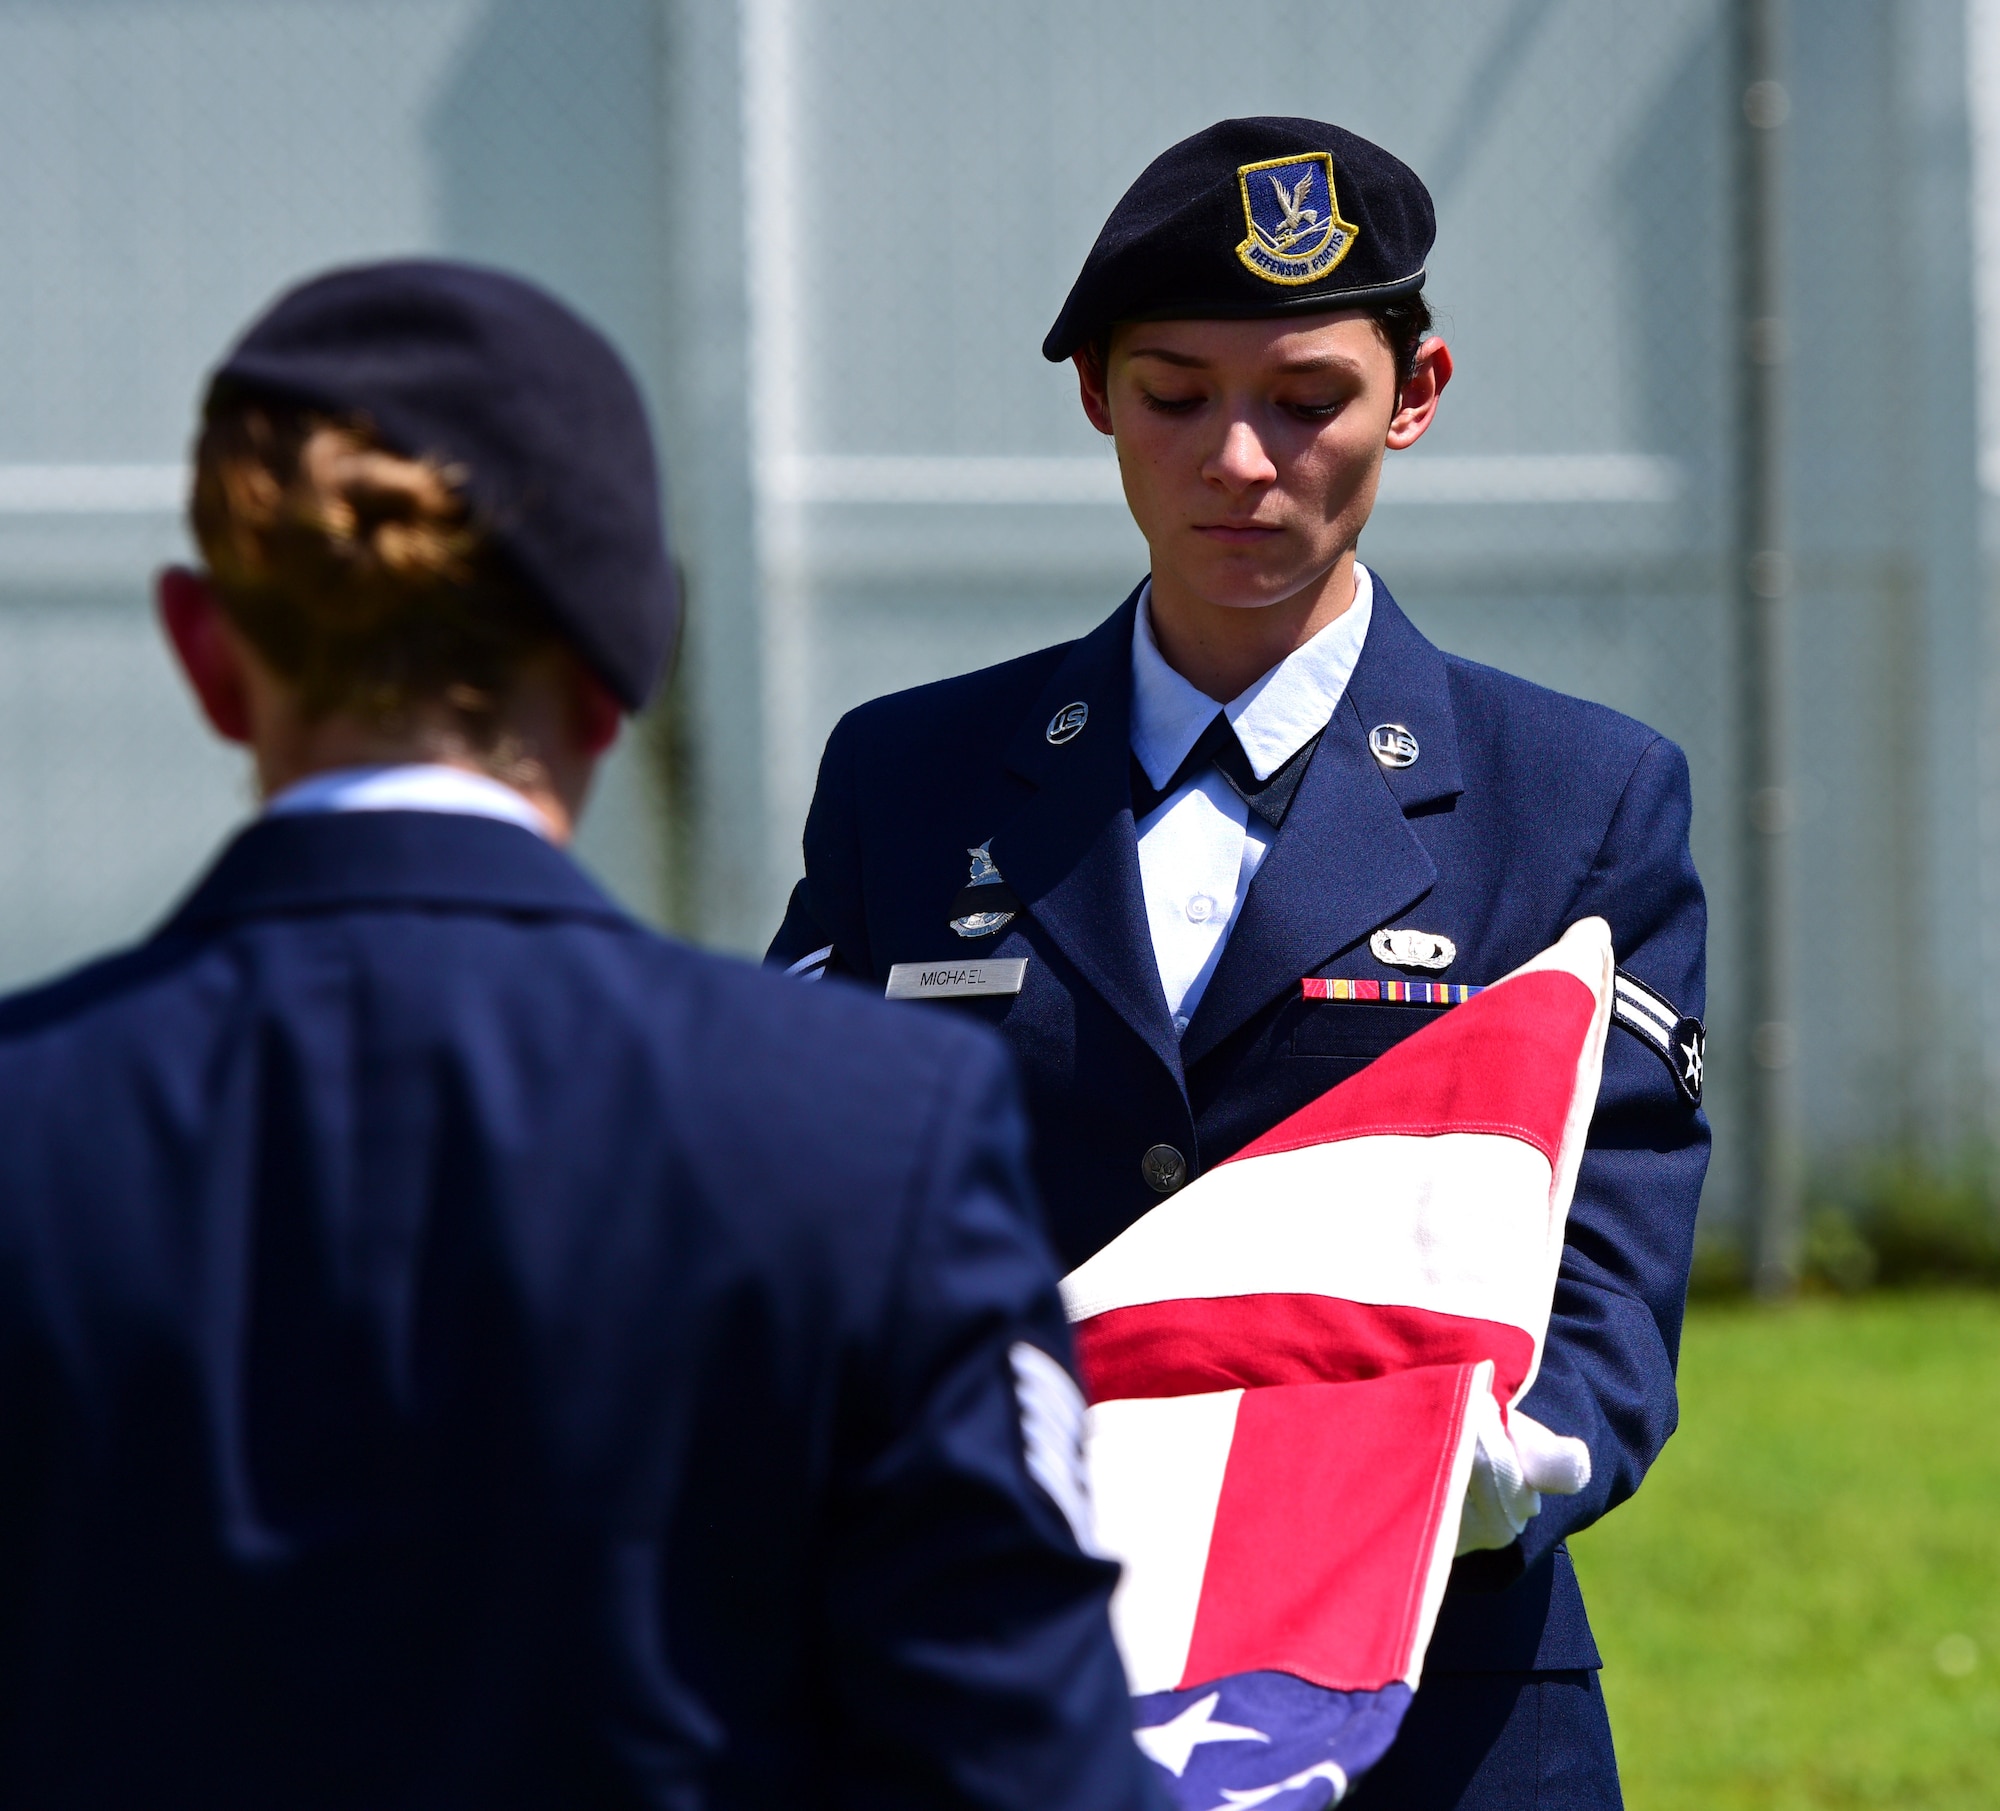 U.S. Air Force Airman 1st Class Arleen Michael, right, and Staff Sgt. Katelyn Grau, left, 325th Security Forces Squadron Airmen, ceremoniously fold the U.S. Flag in remembrance of military working dog (MWD) Jack during his memorial service at Tyndall air Force Base, Fla., Sept. 7, 2018. Jack, a Belgian Malinois, was an explosives and patrol dog who shared a special bond with his handlers. MWDs are afforded military customs and courtesies. (U.S. Air Force photo by Senior Airman Isaiah J. Soliz)